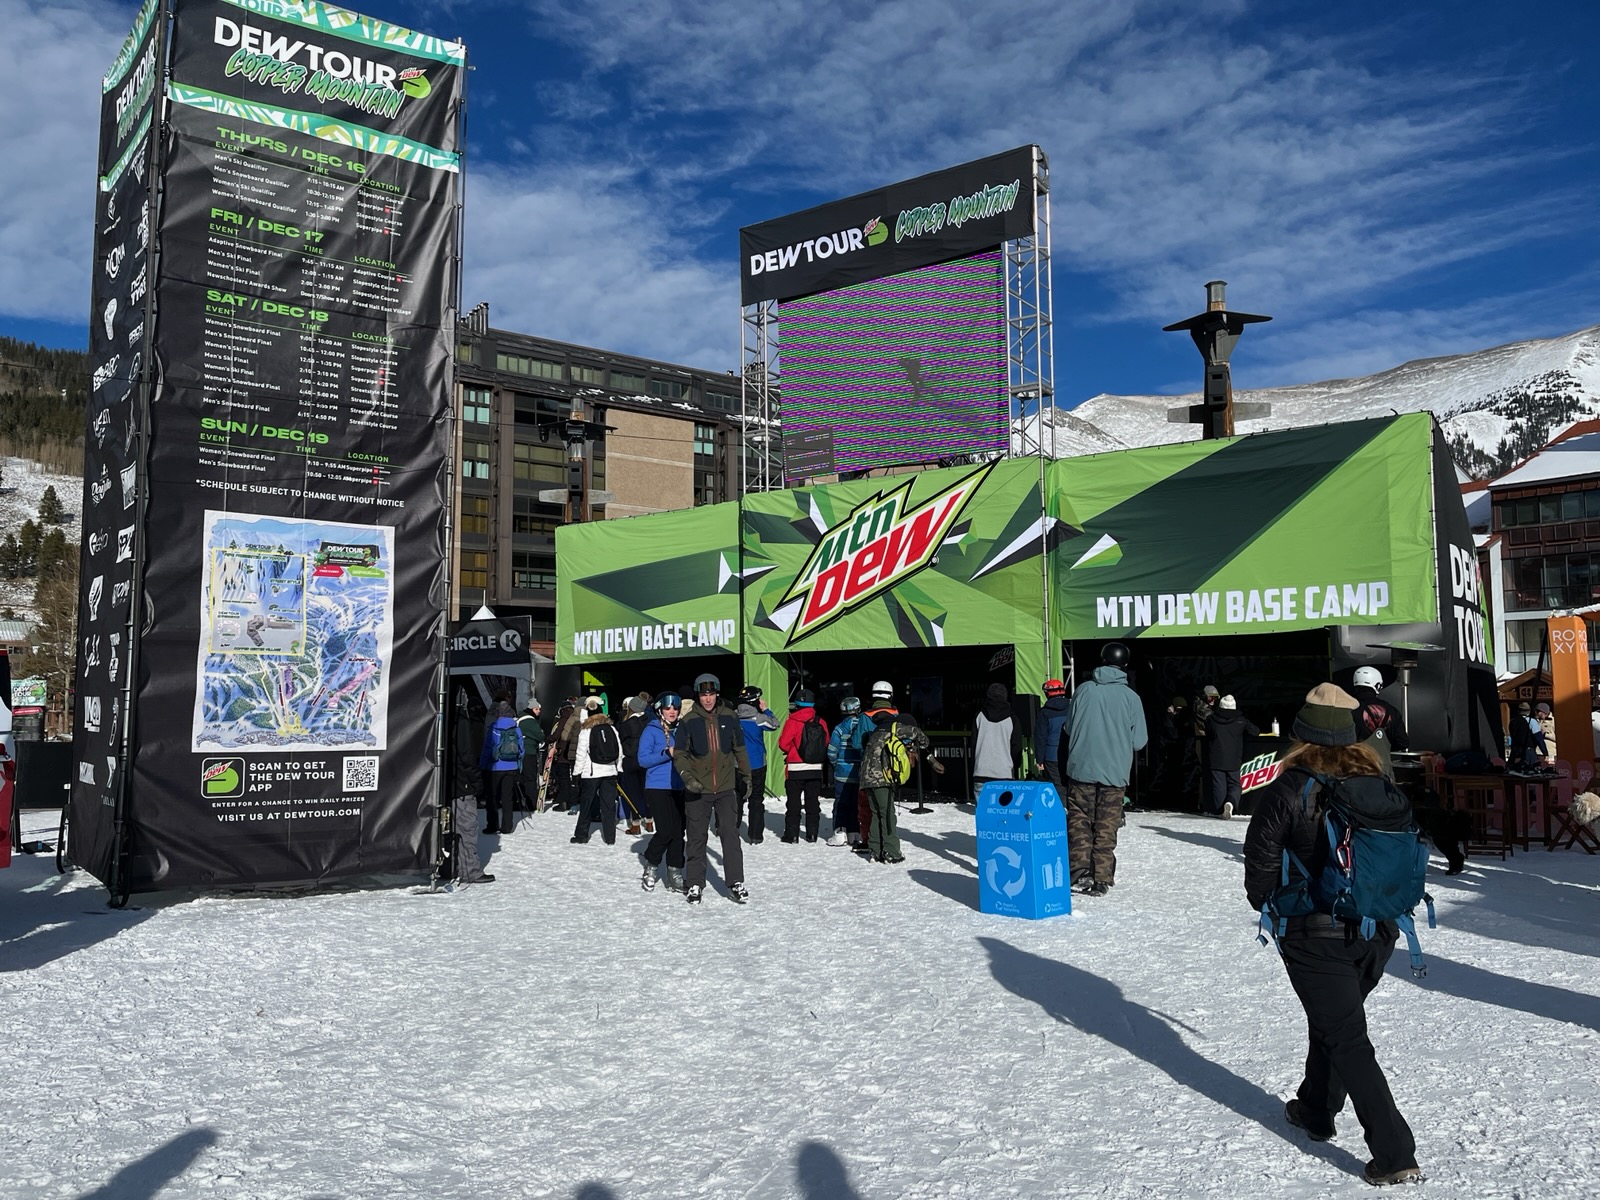 Dew Tour Brand Activations and Brand Ambassadors